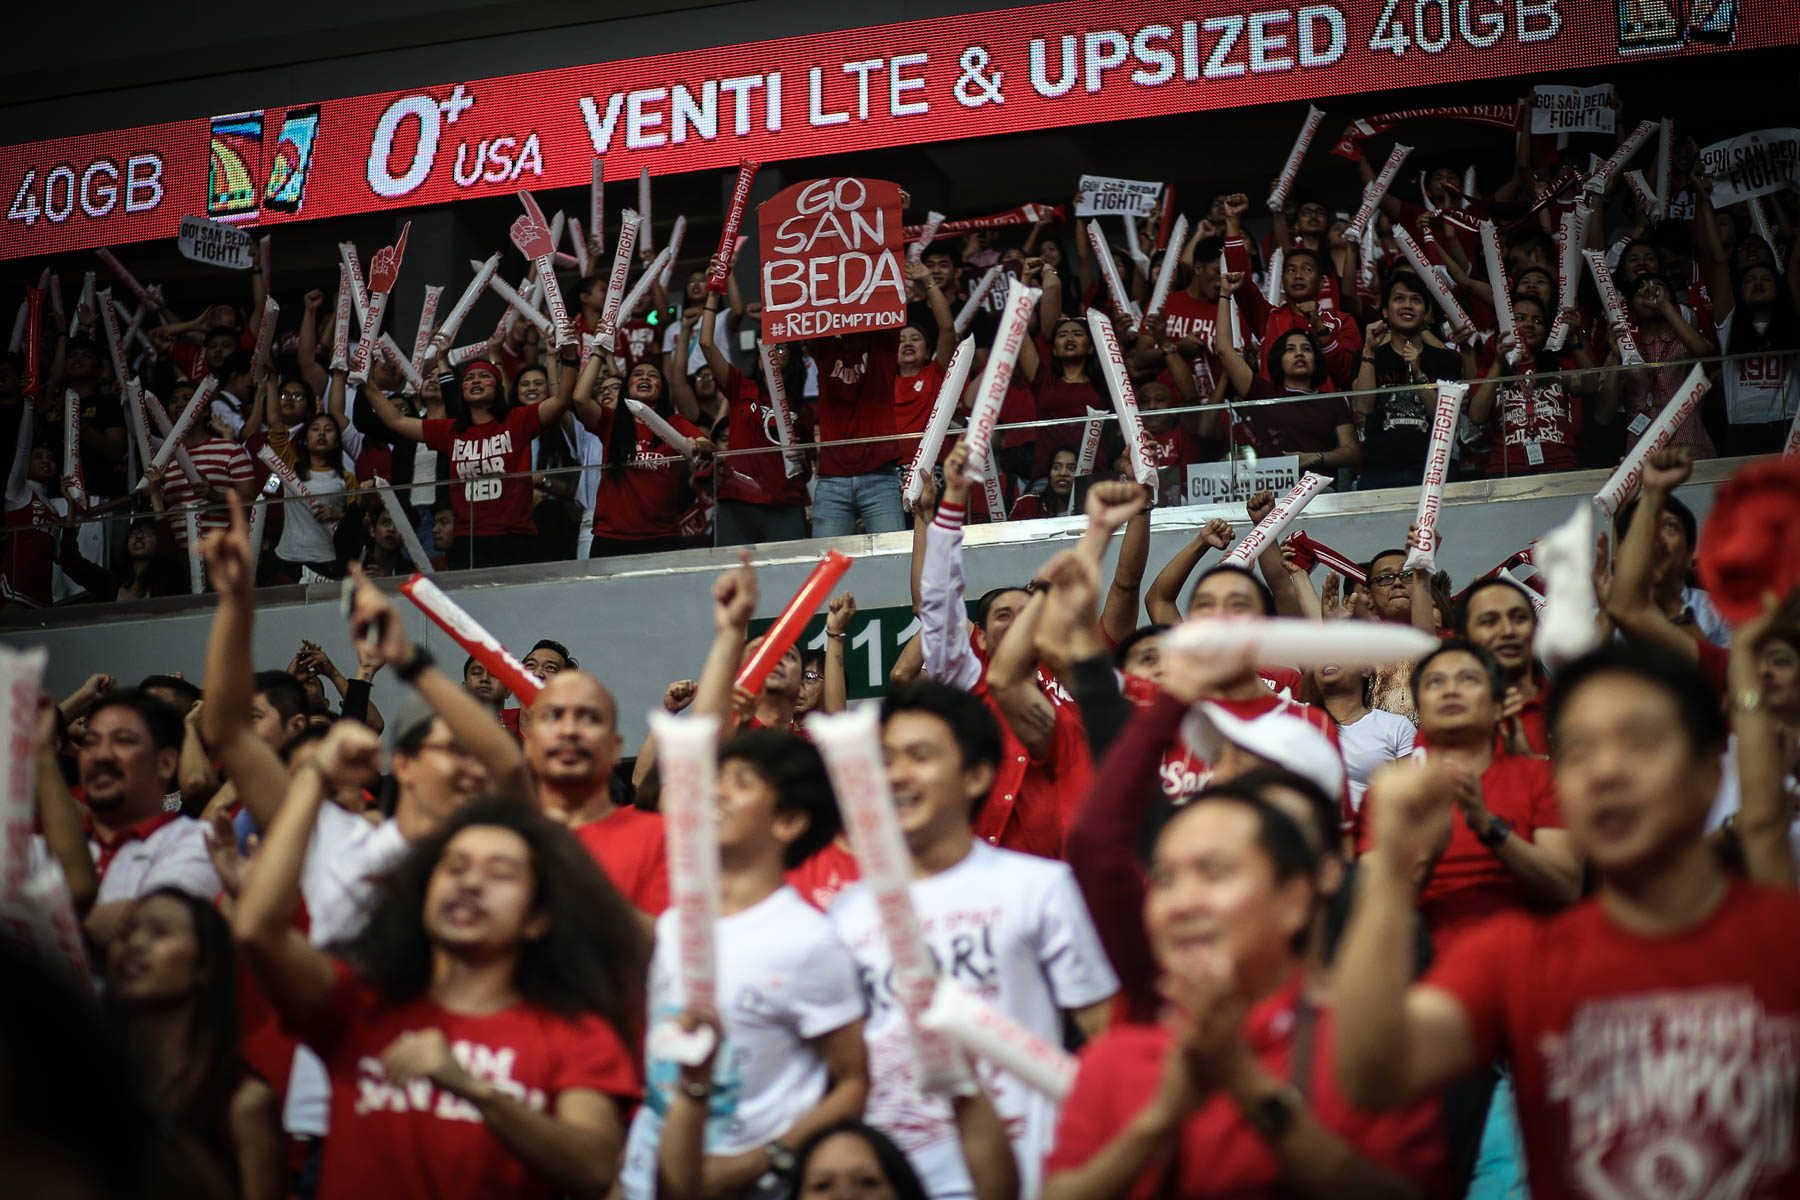 REDEMPTION. San Beda fans cheer their team on as they redeem themselves from a championship loss last season. Photo by Josh Albelda/Rappler 